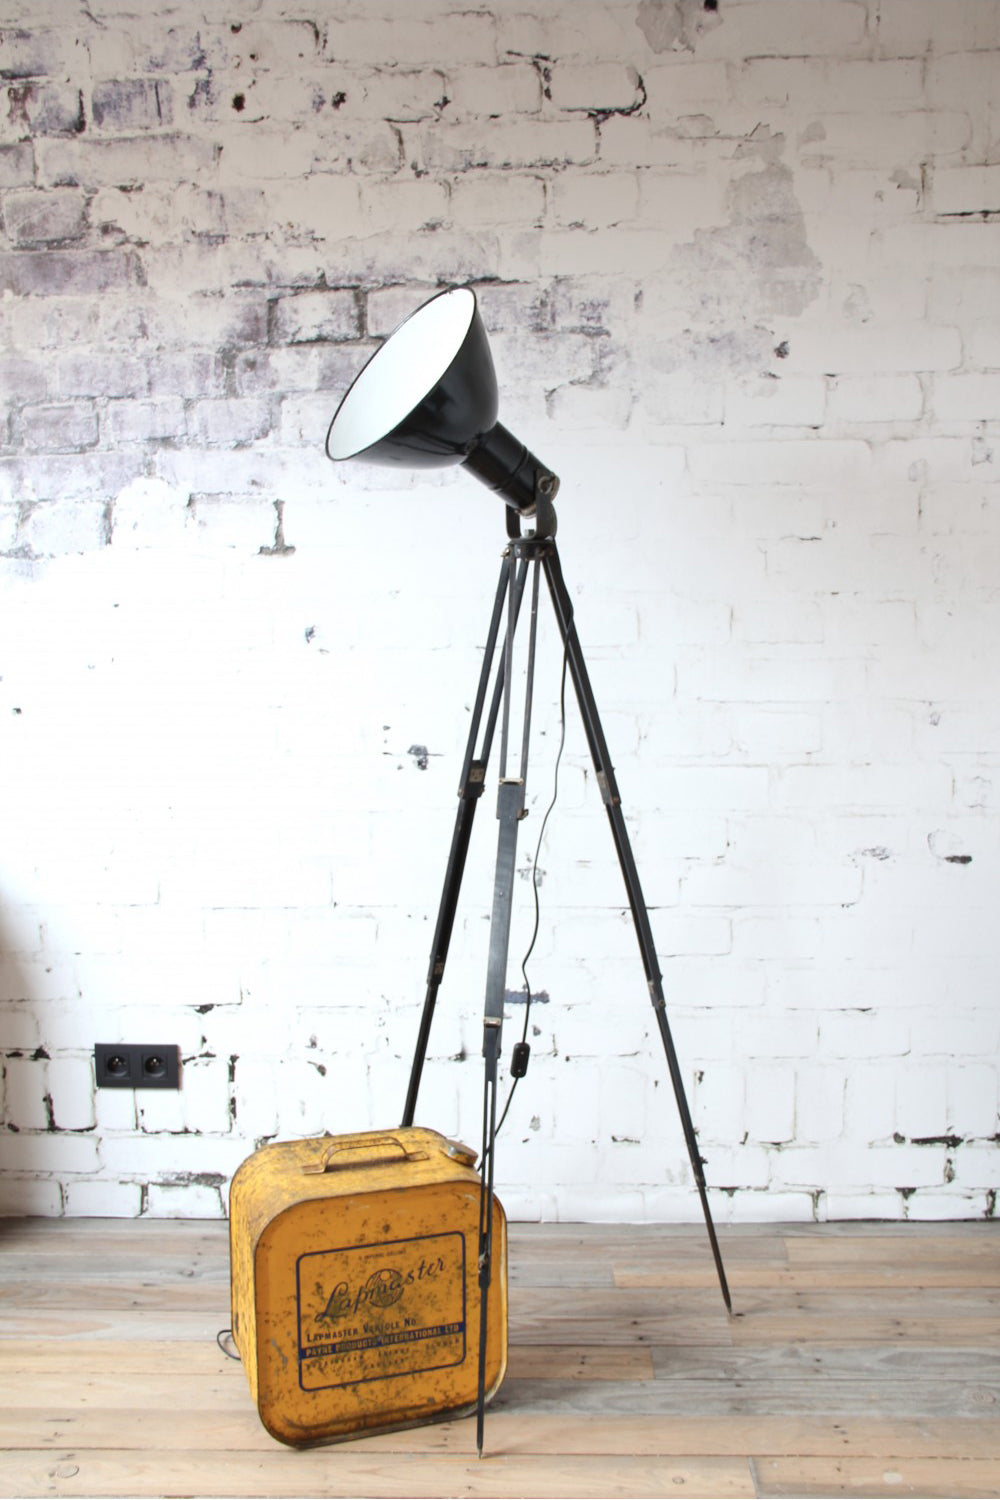 Old industrial lamp on tripod